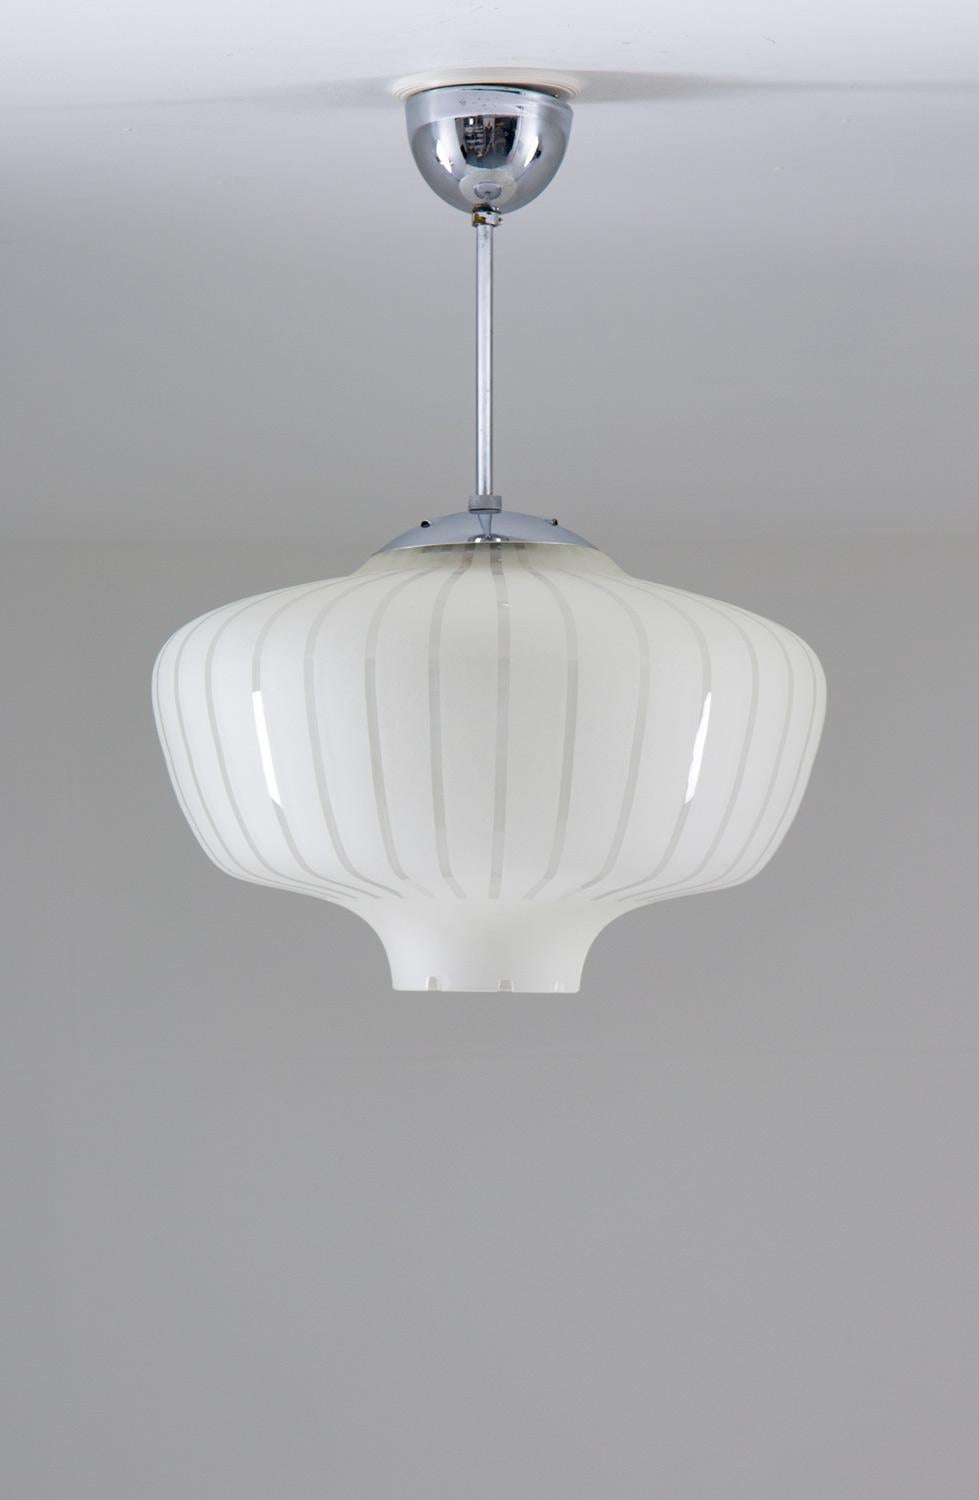 An exquisite and elegantly formed pendant light, crafted in a harmonious blend of gleaming chrome and frosted glass, adds a touch of sophistication and refinement to any space. Produced in Sweden during the 1940s, this pendant light is a true work